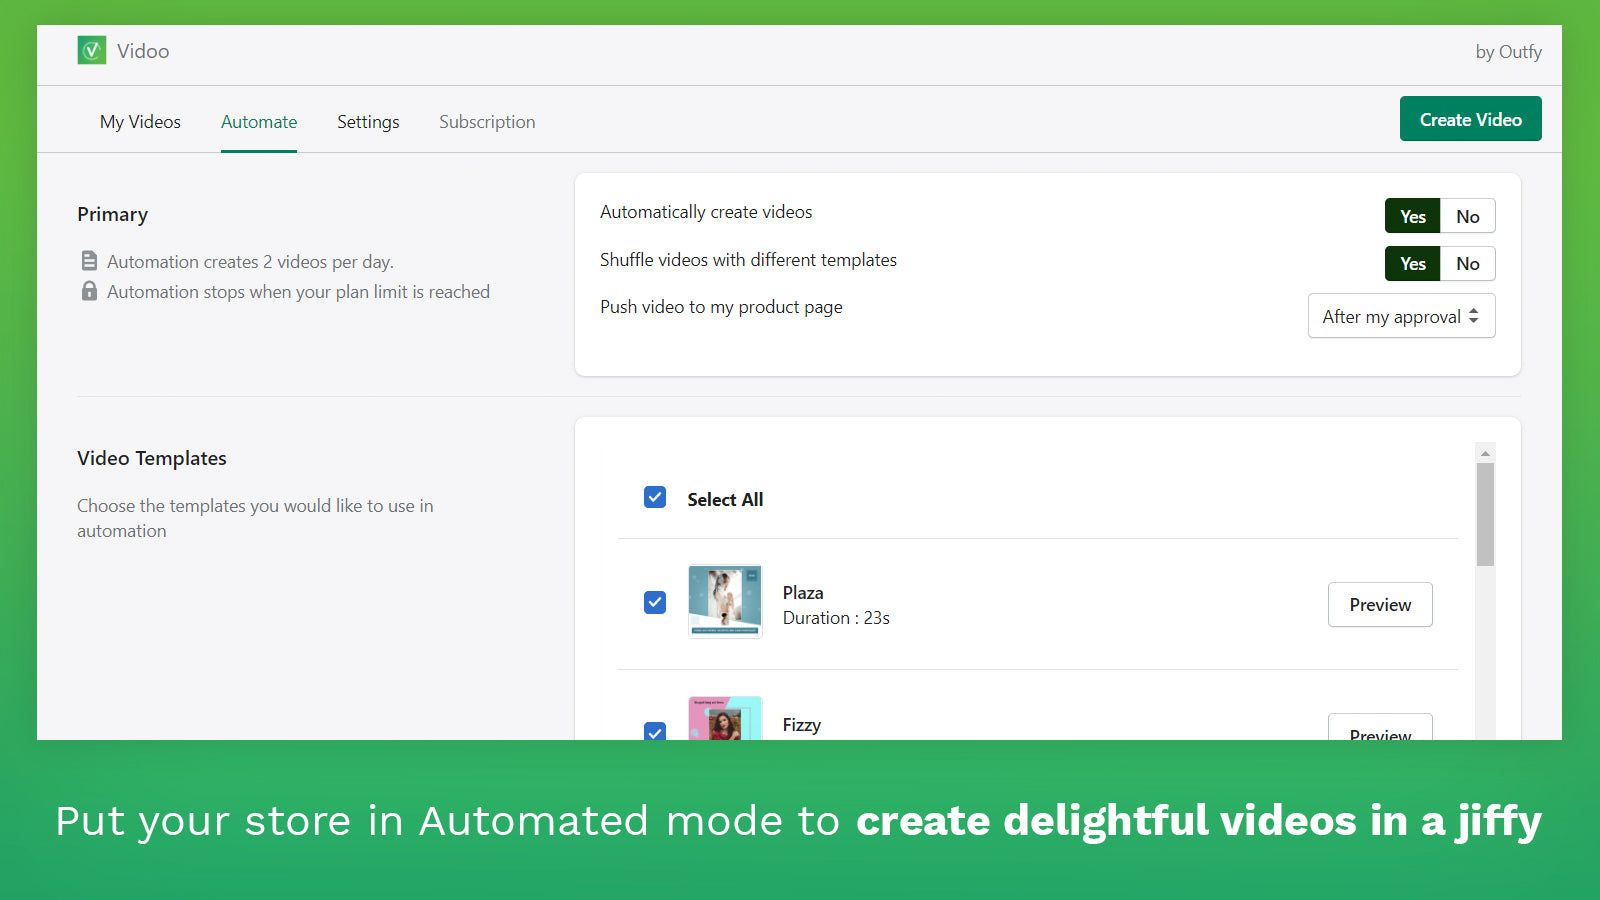 Put your store in Automated mode to create delightful videos